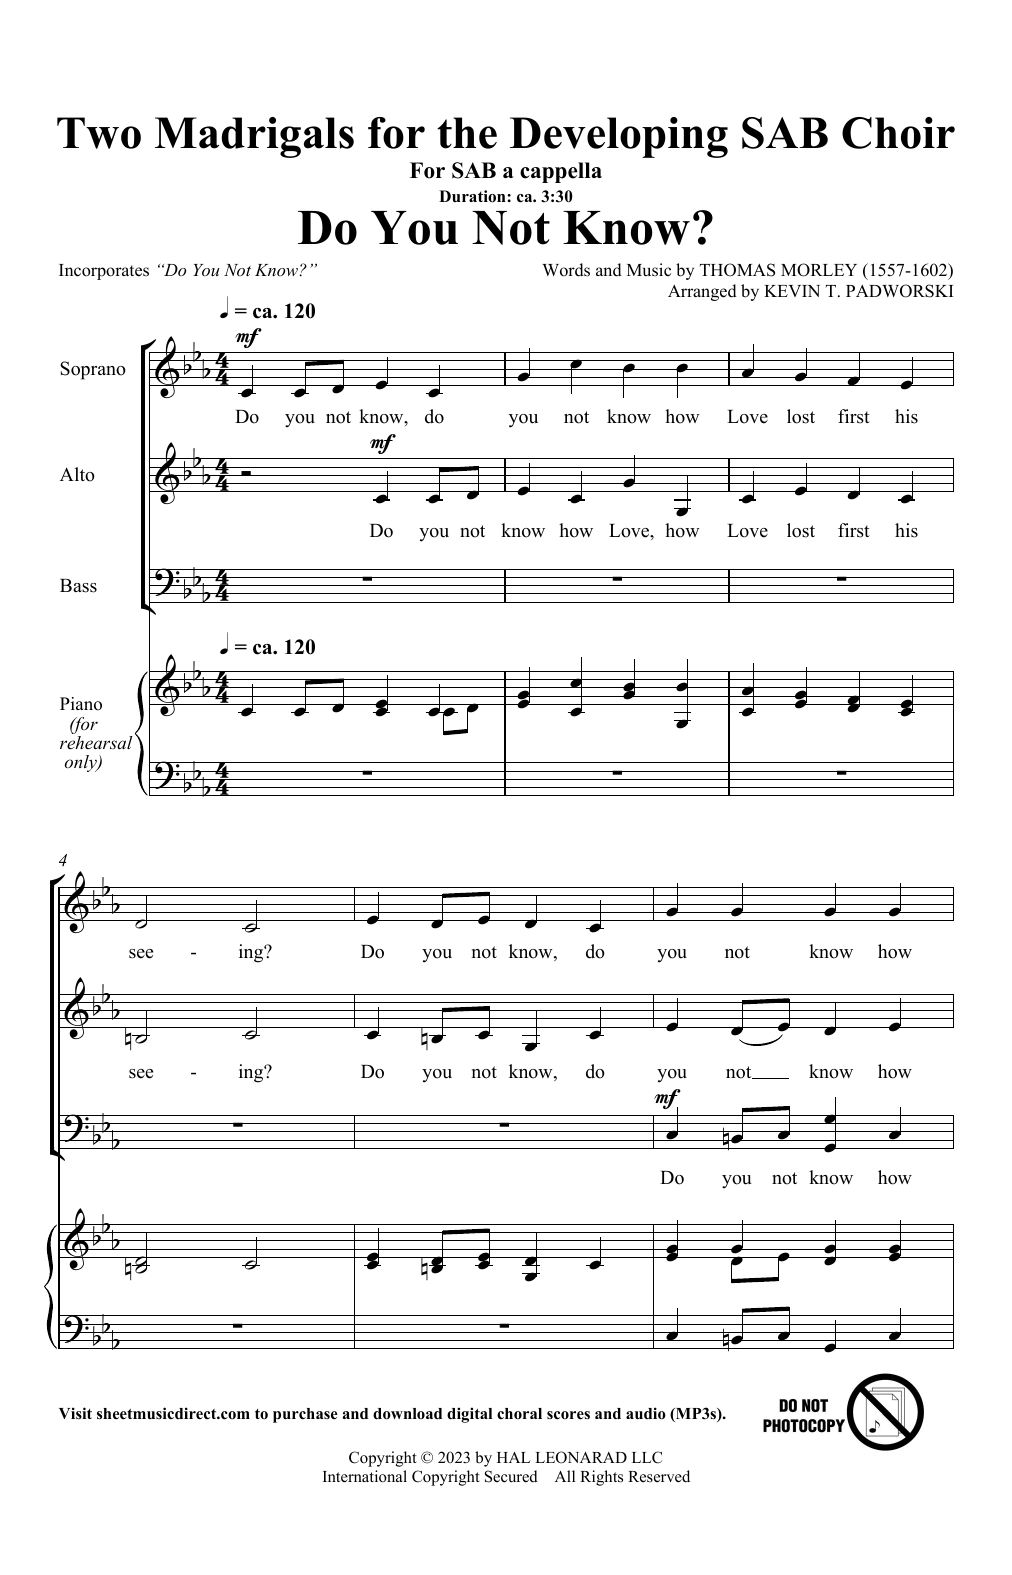 Download Kevin Padworski Two Madrigals For The Developing SAB Ch Sheet Music